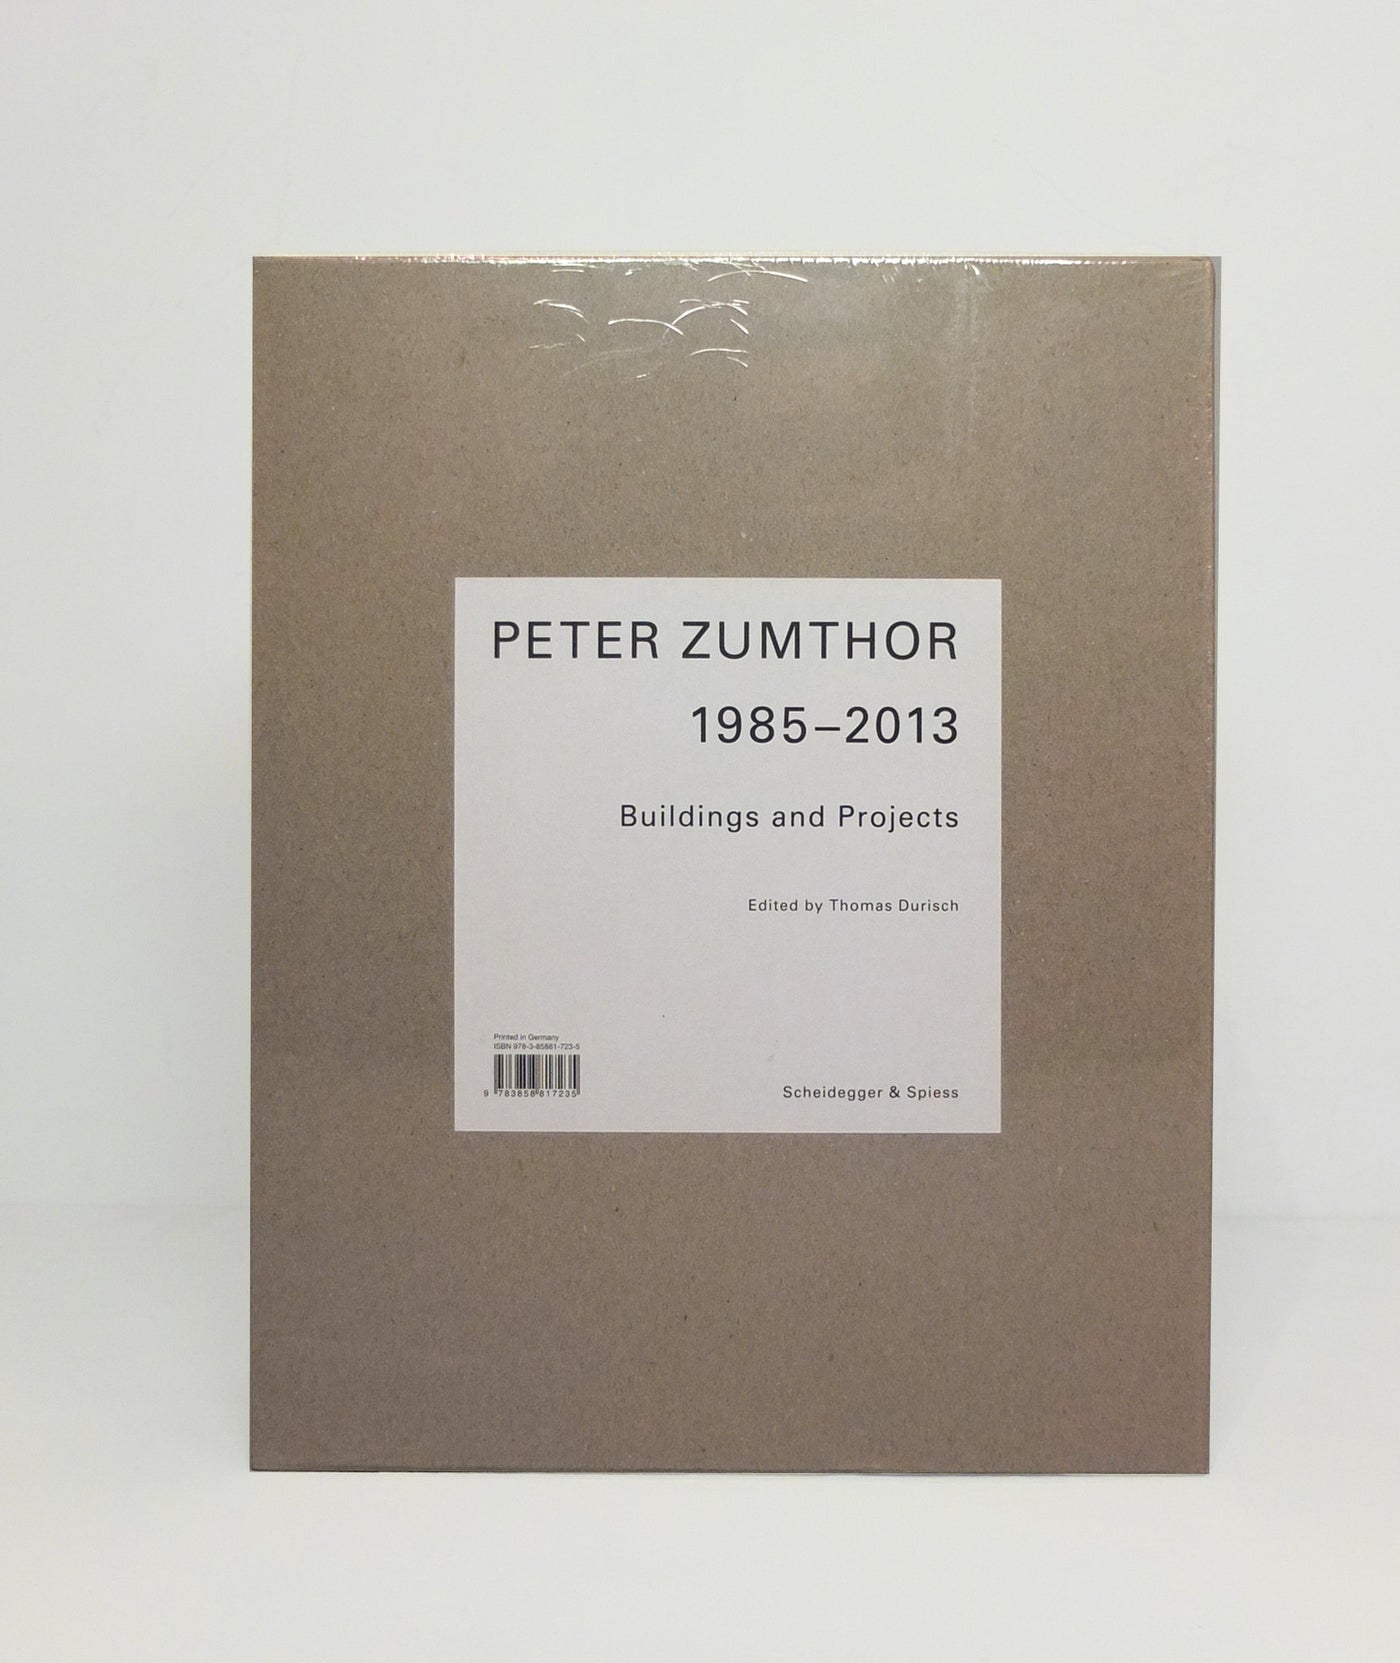 Peter Zumthor 1985-2013: Buildings and Projects